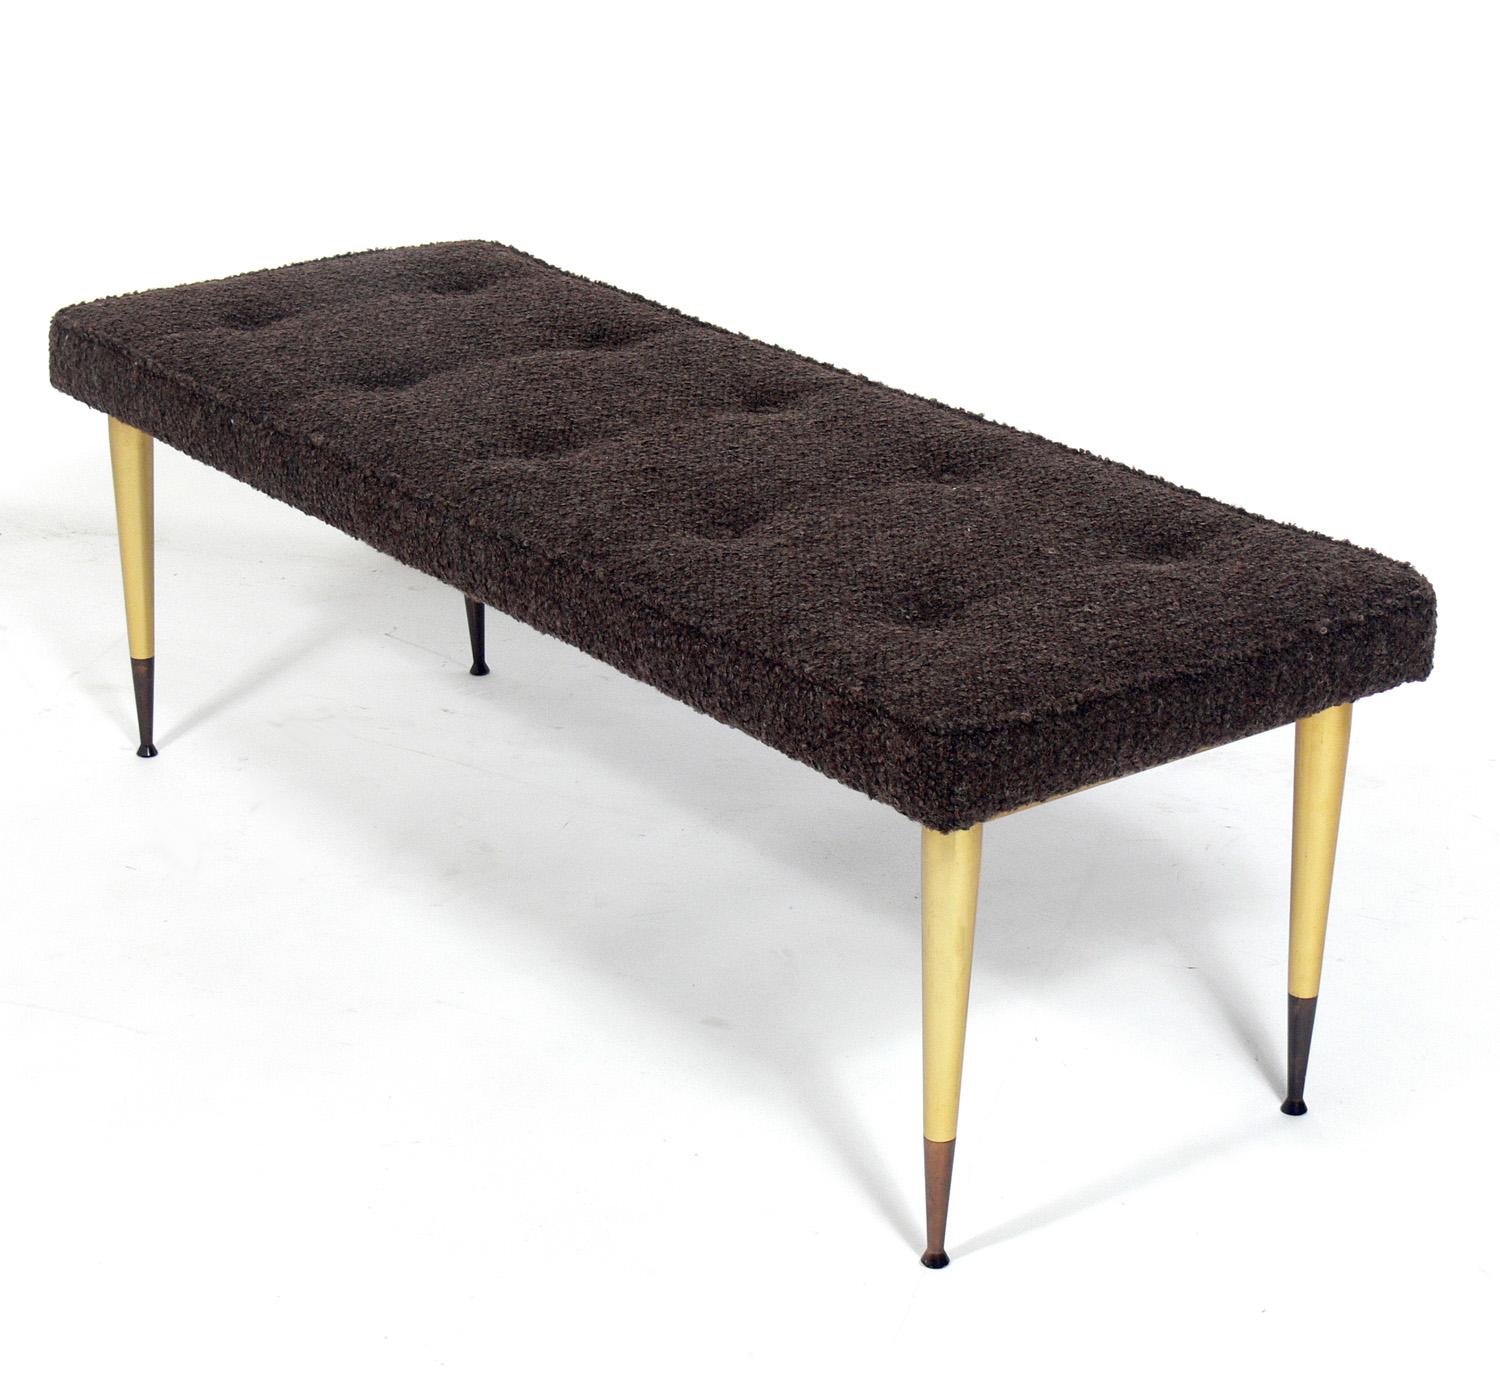 Modernist Italian bench, circa 1960s. Marked Made In Italy underneath. It is constructed of anodized aluminum with a brass color finish with bronze color feet. It has been reupholstered in a nubby brown fabric.